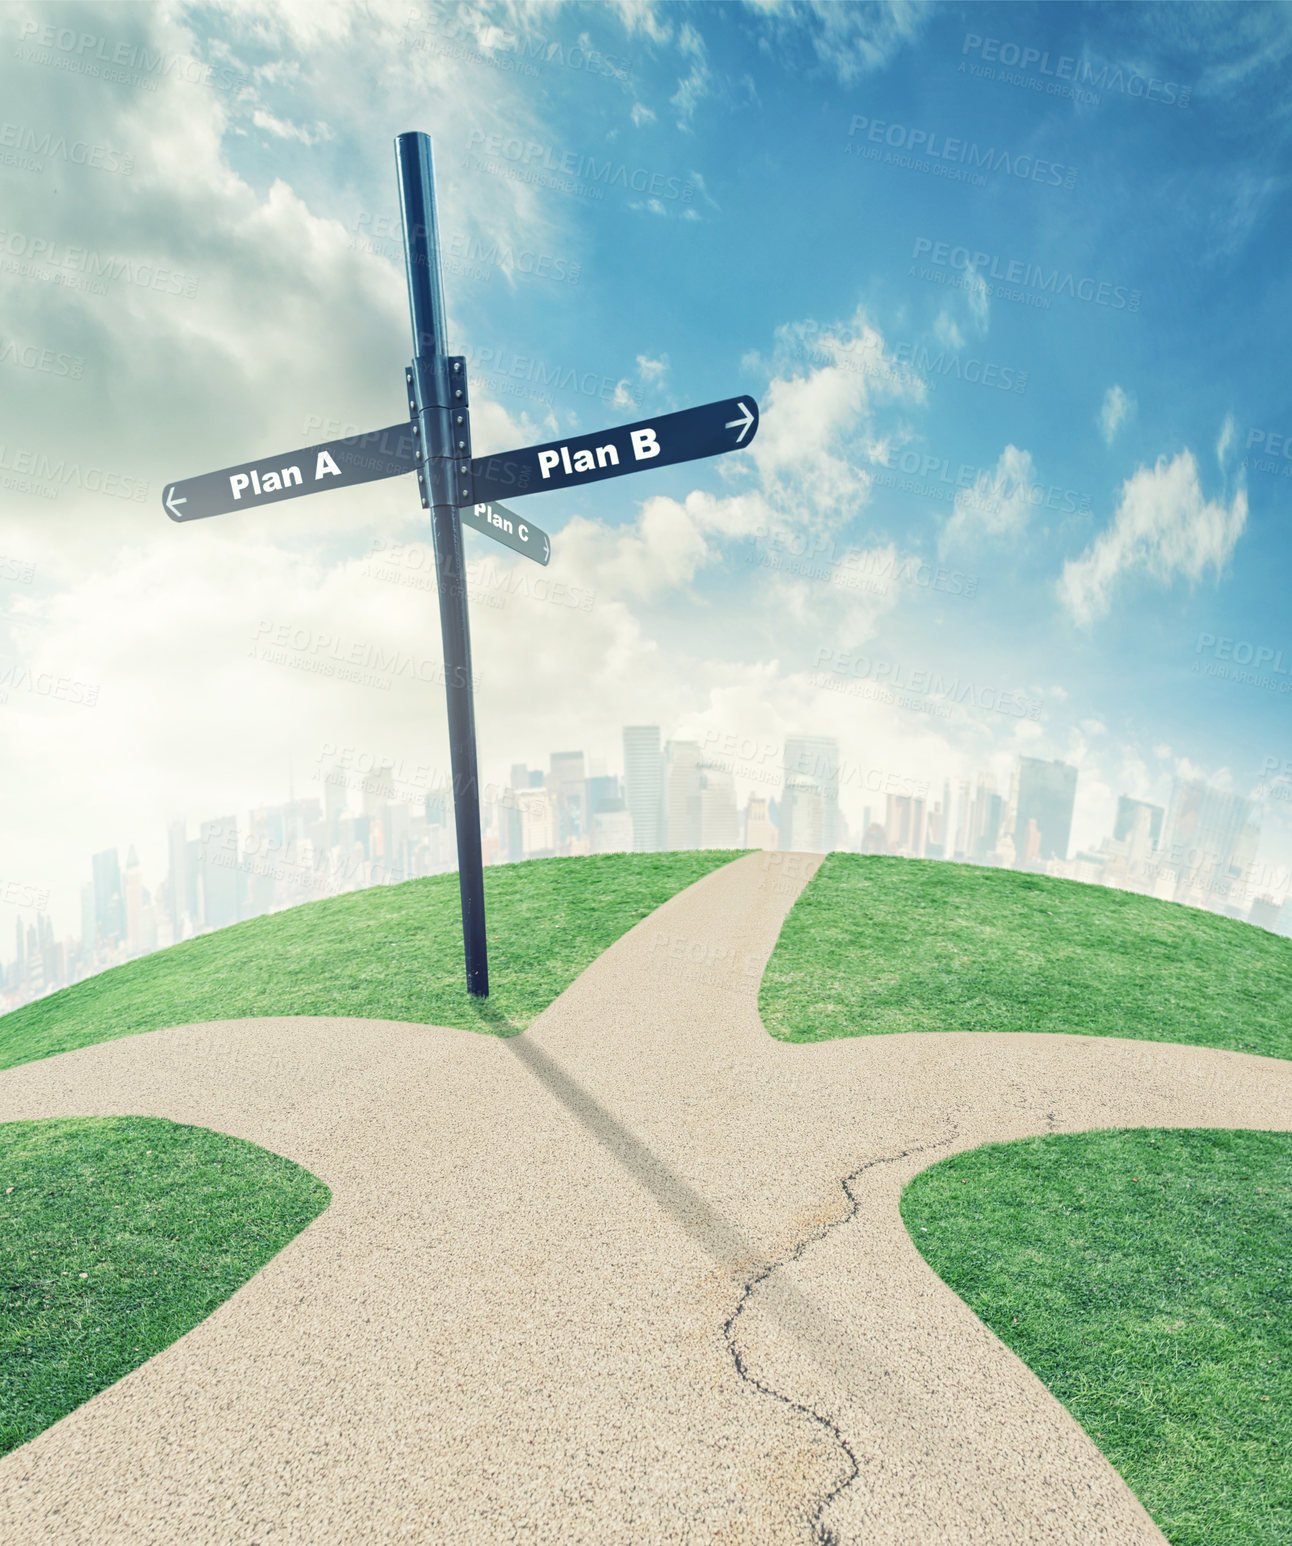 Buy stock photo Illustration of a road split into directions leading to different plans